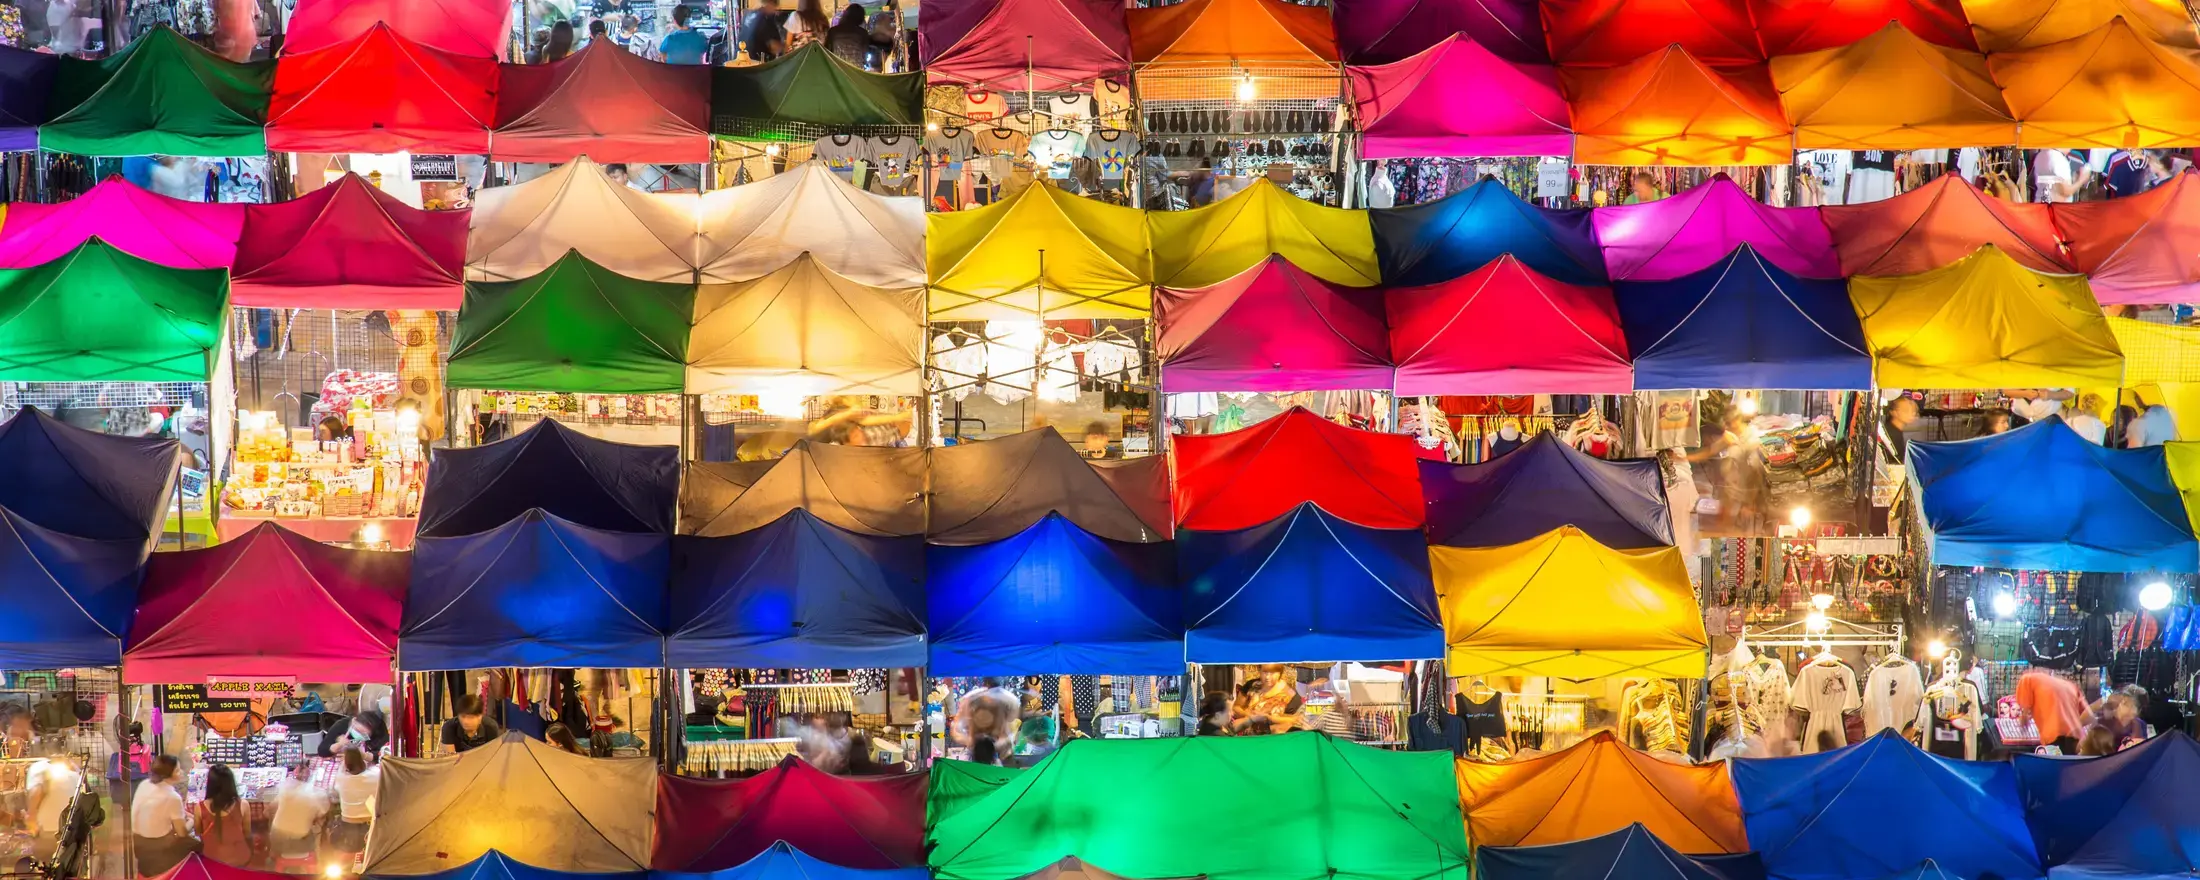 Colourful tents in a market